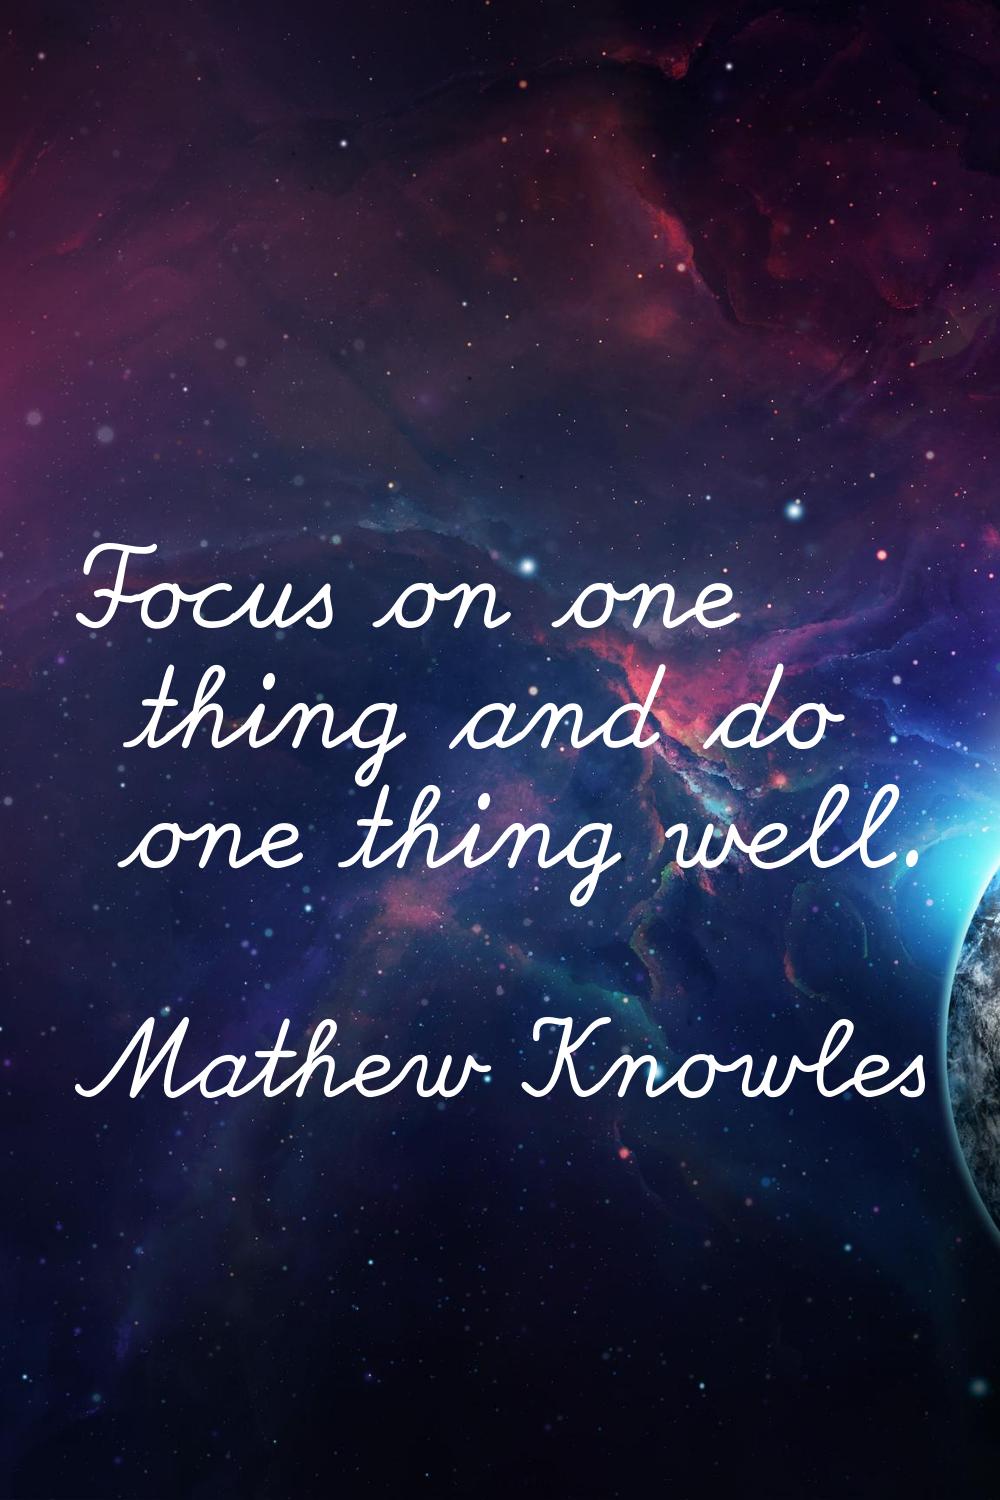 Focus on one thing and do one thing well.